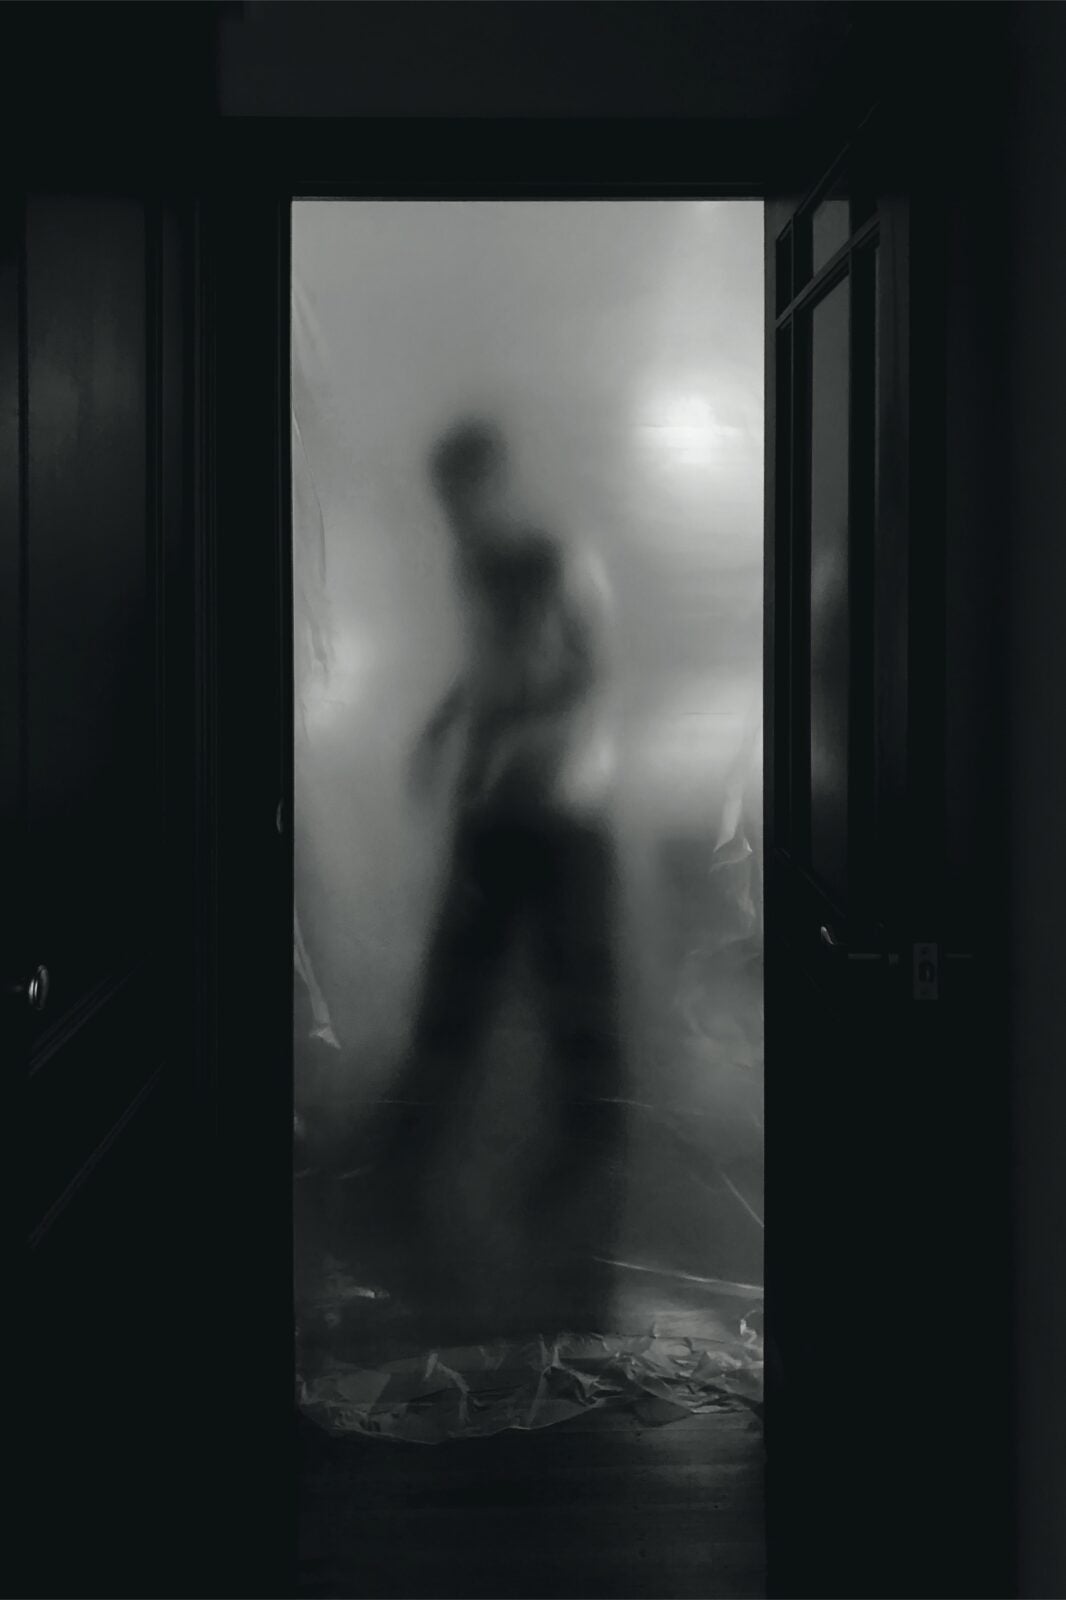 A ghostly sillhoutte of a man walking in a room.